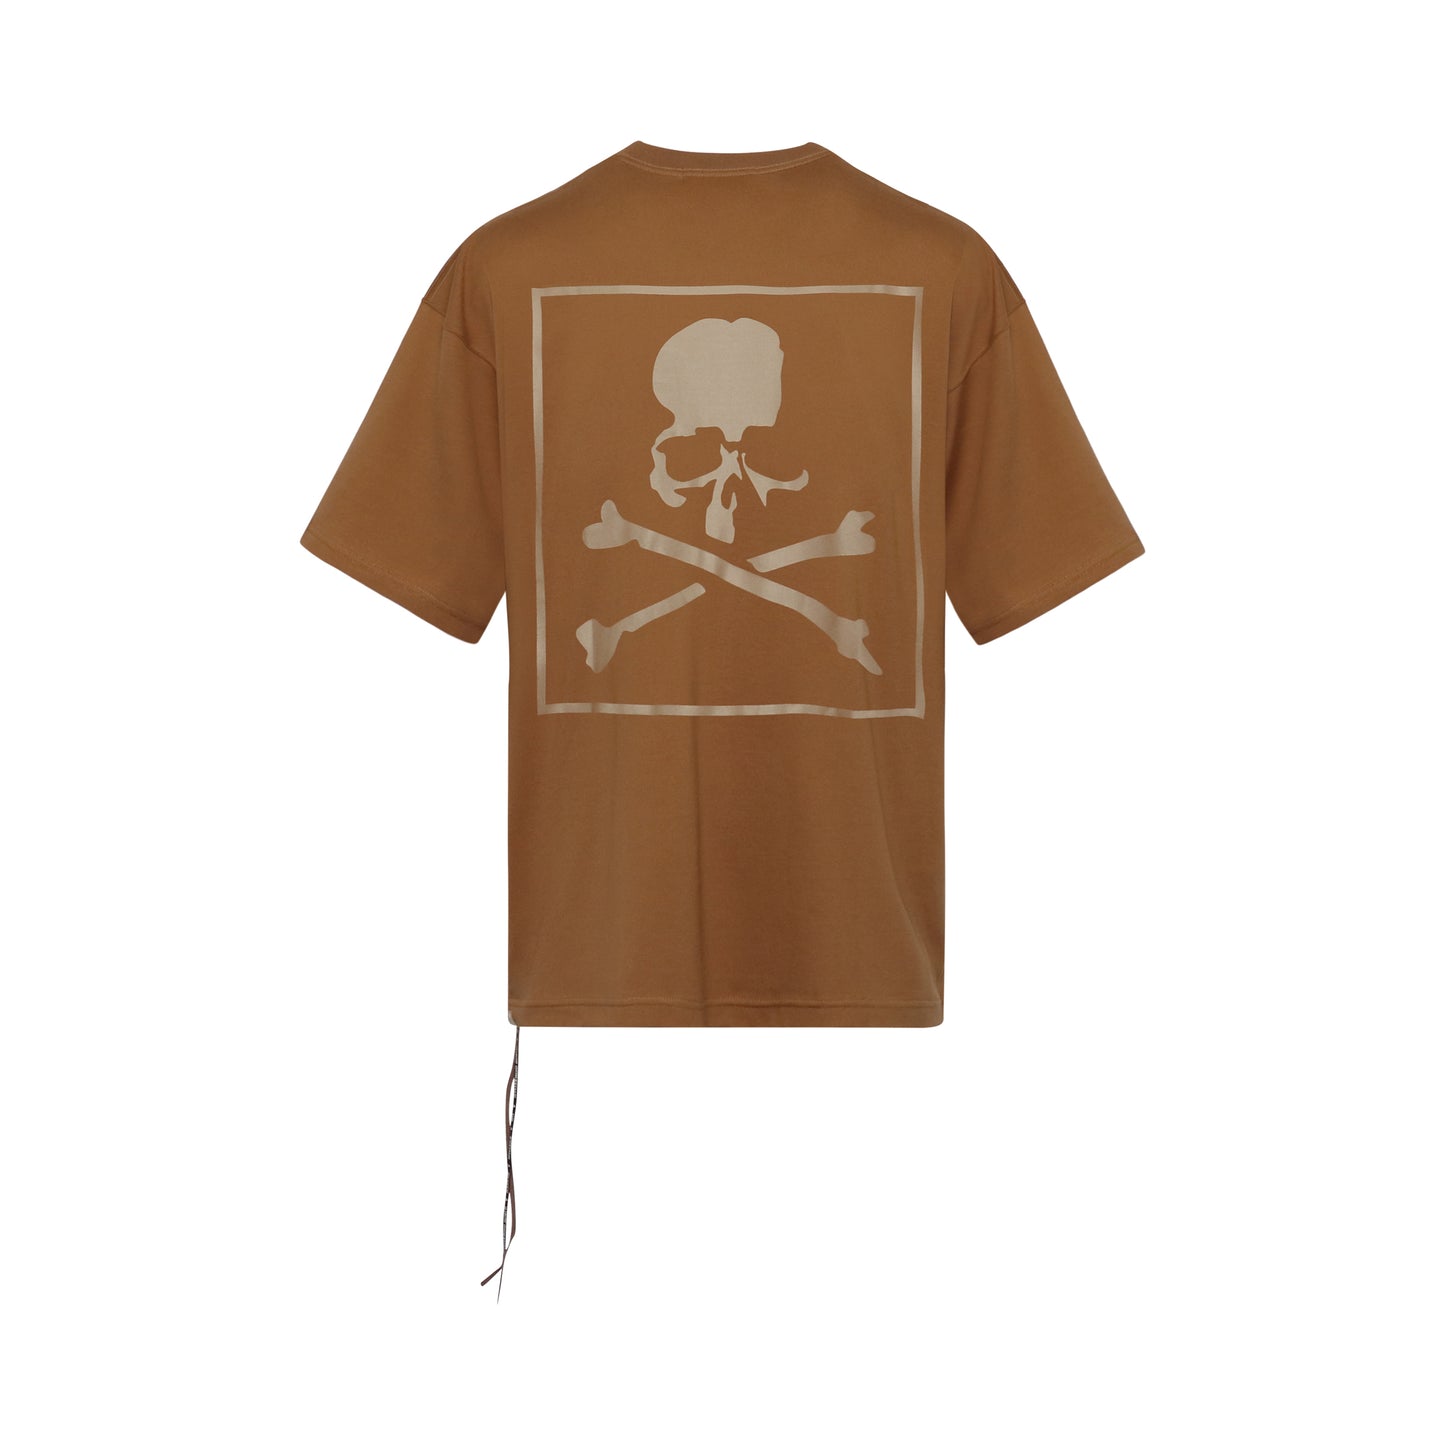 Boxed Logo Boxy Fit T-Shirt in Camel